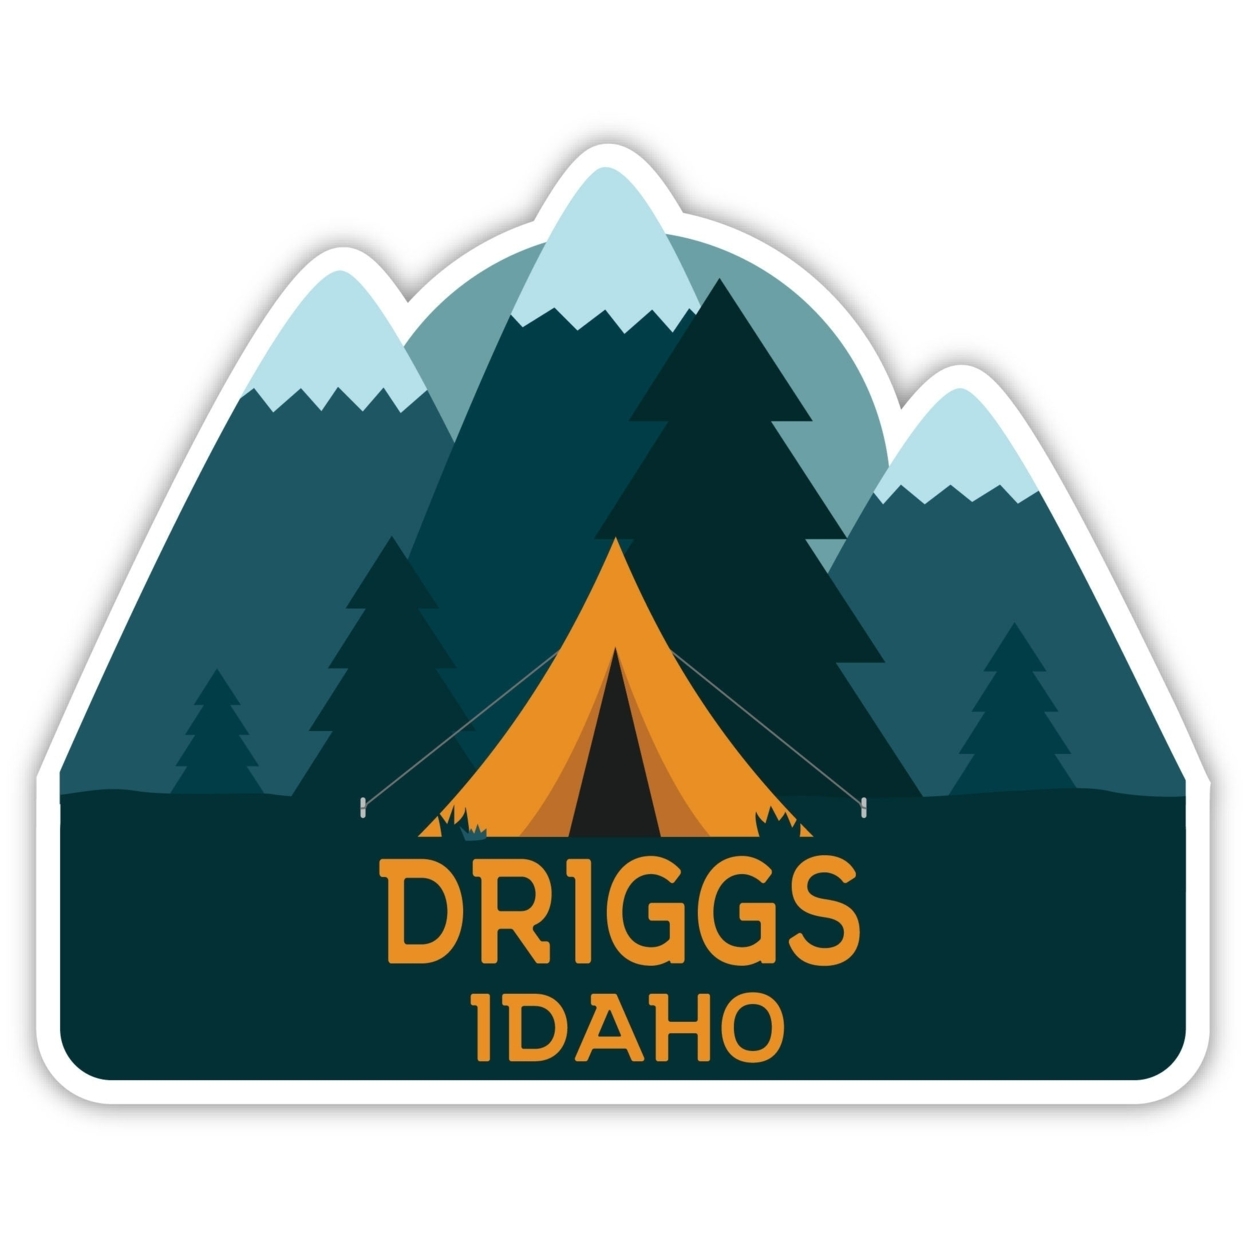 Driggs Idaho Souvenir Decorative Stickers (Choose Theme And Size) - Single Unit, 6-Inch, Great Outdoors